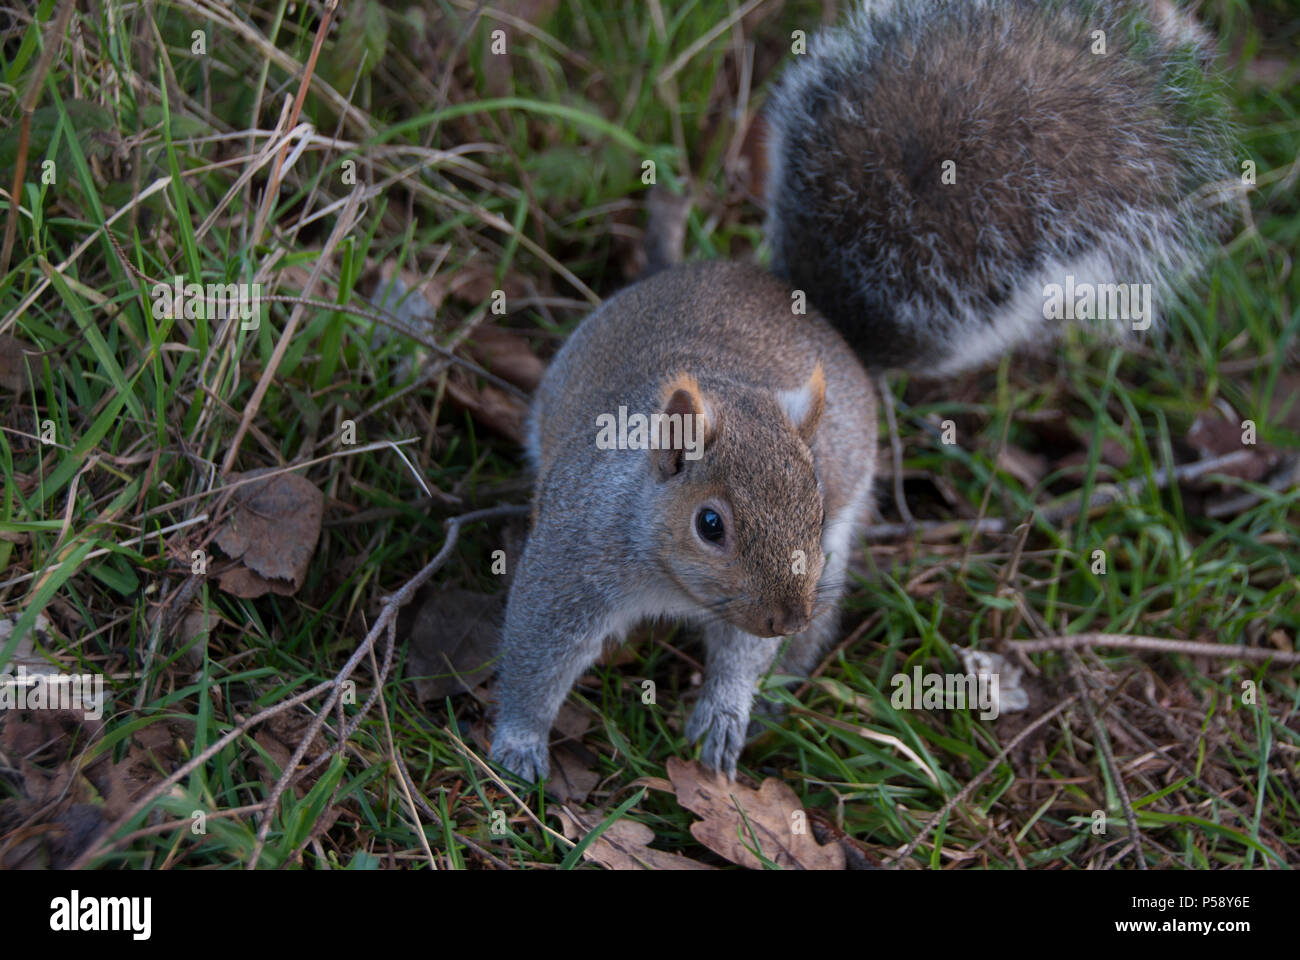 Closeup image of Eastern Fox Squirrel ( Scirius niger) on the ground; this is an invasive species of squirrel found in most of western North America Stock Photo